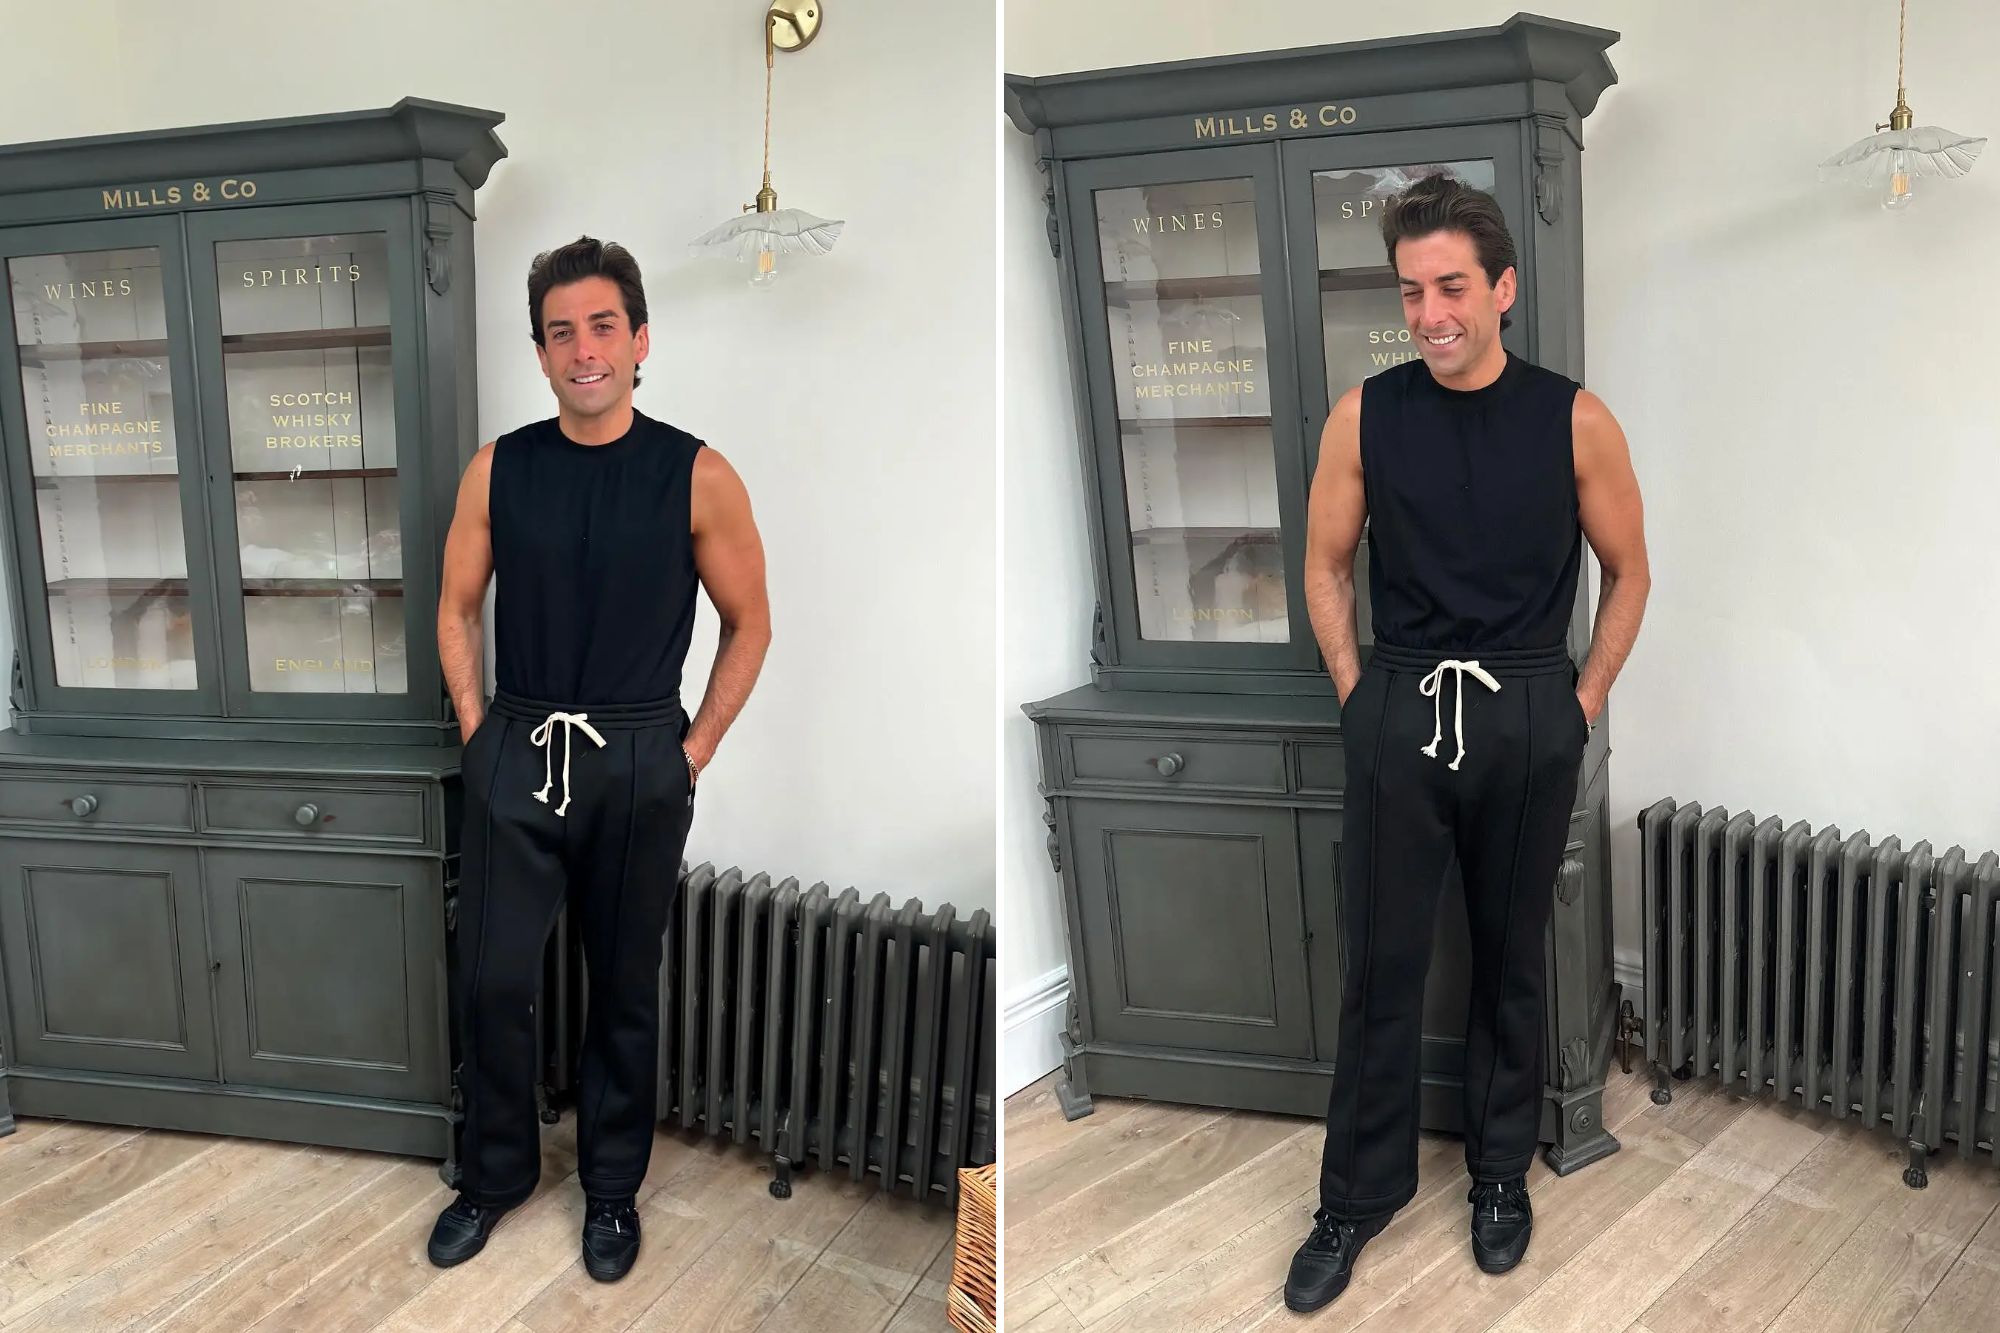 Towie legend James Argent shows off his ripped arms in new snaps taken by ex